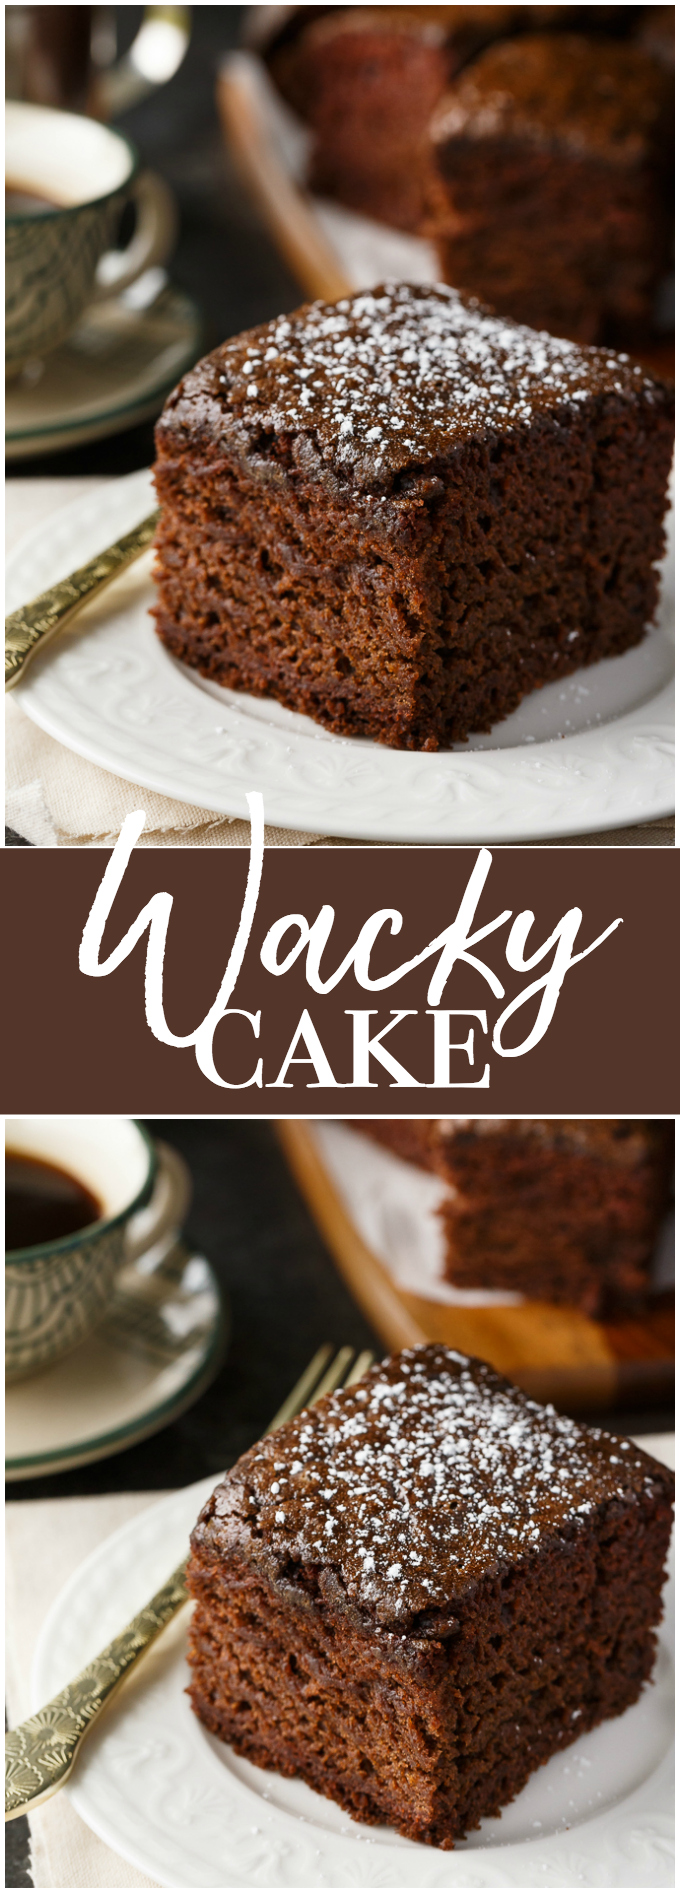 Wacky Cake - Moist, chocolatey and easy to make! This vintage cake was popular in the Depression era and contains no butter, milk or eggs.